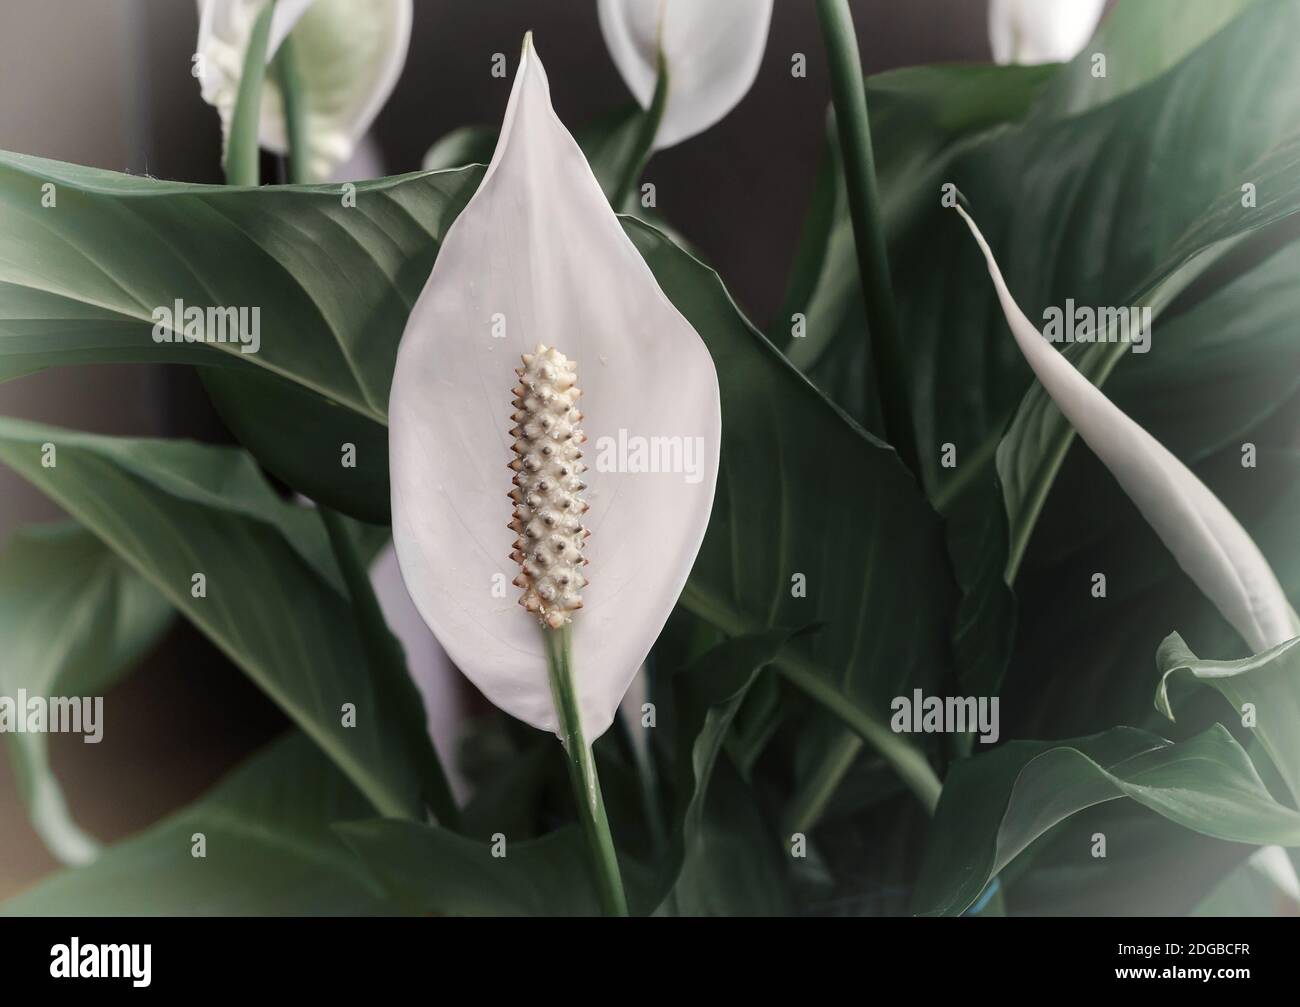 Indoor plants: white spatifilum flower among the leaves. Stock Photo